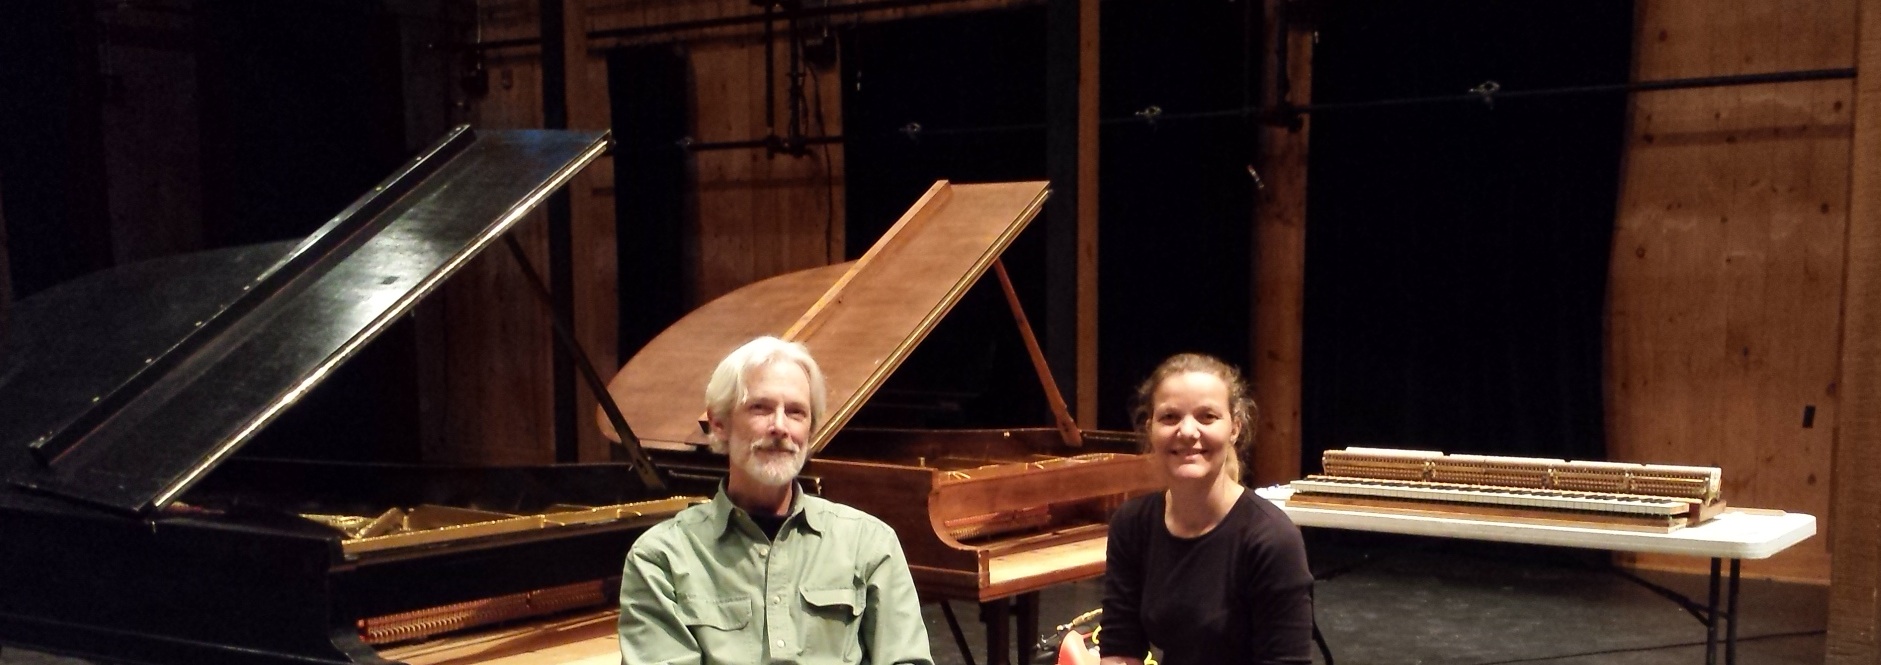 Terry Flynn and Iris Tuomenoksa taking a little break during work at three pianos at Jacob's Pillow.